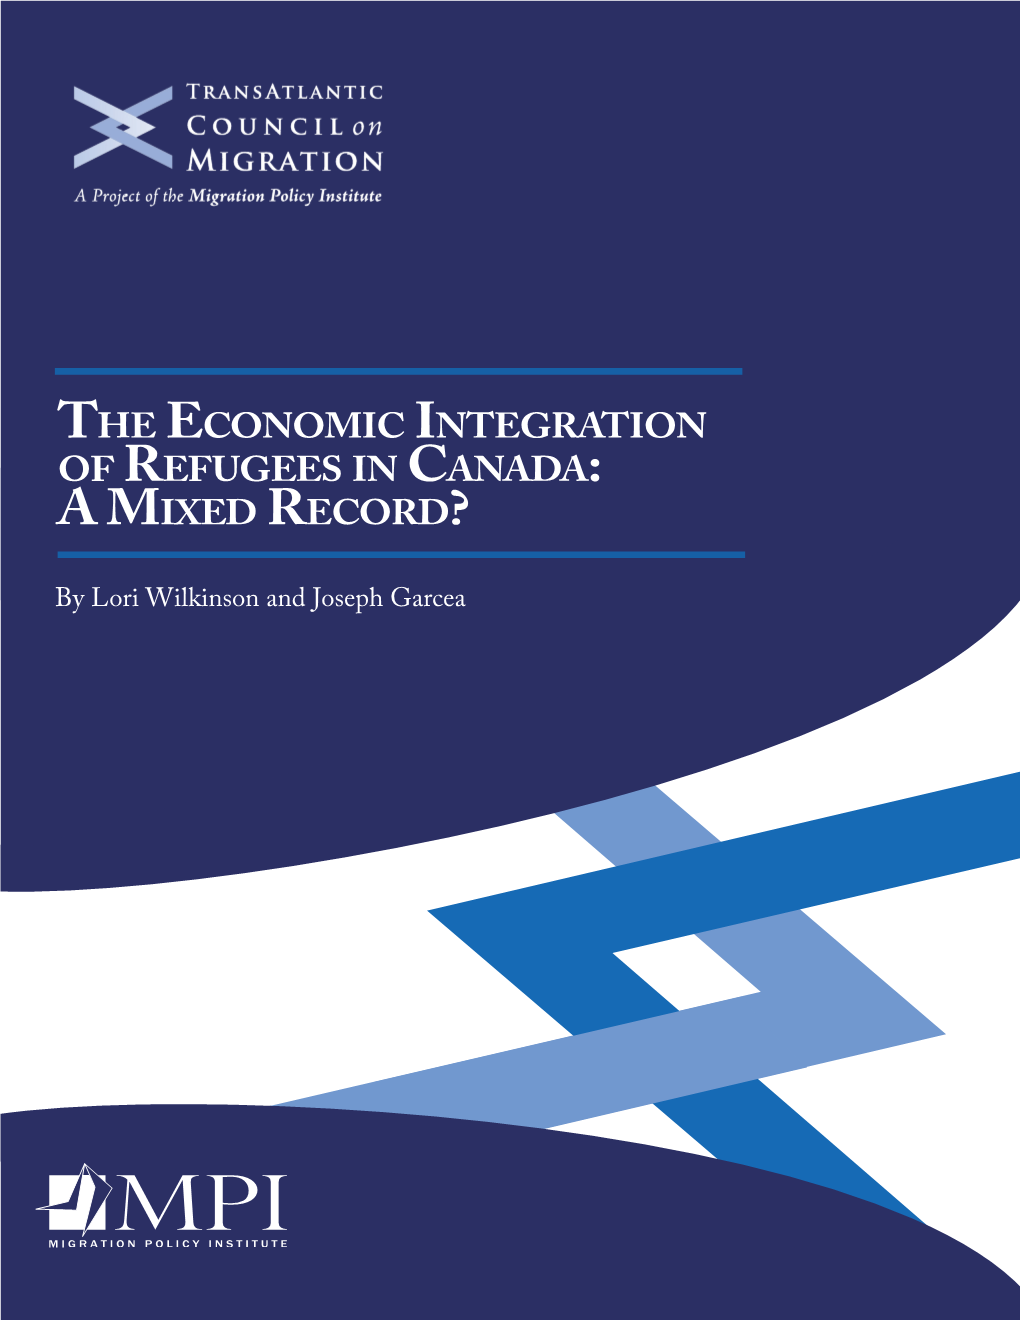 The Economic Integration of Refugees in Canada: a Mixed Record?